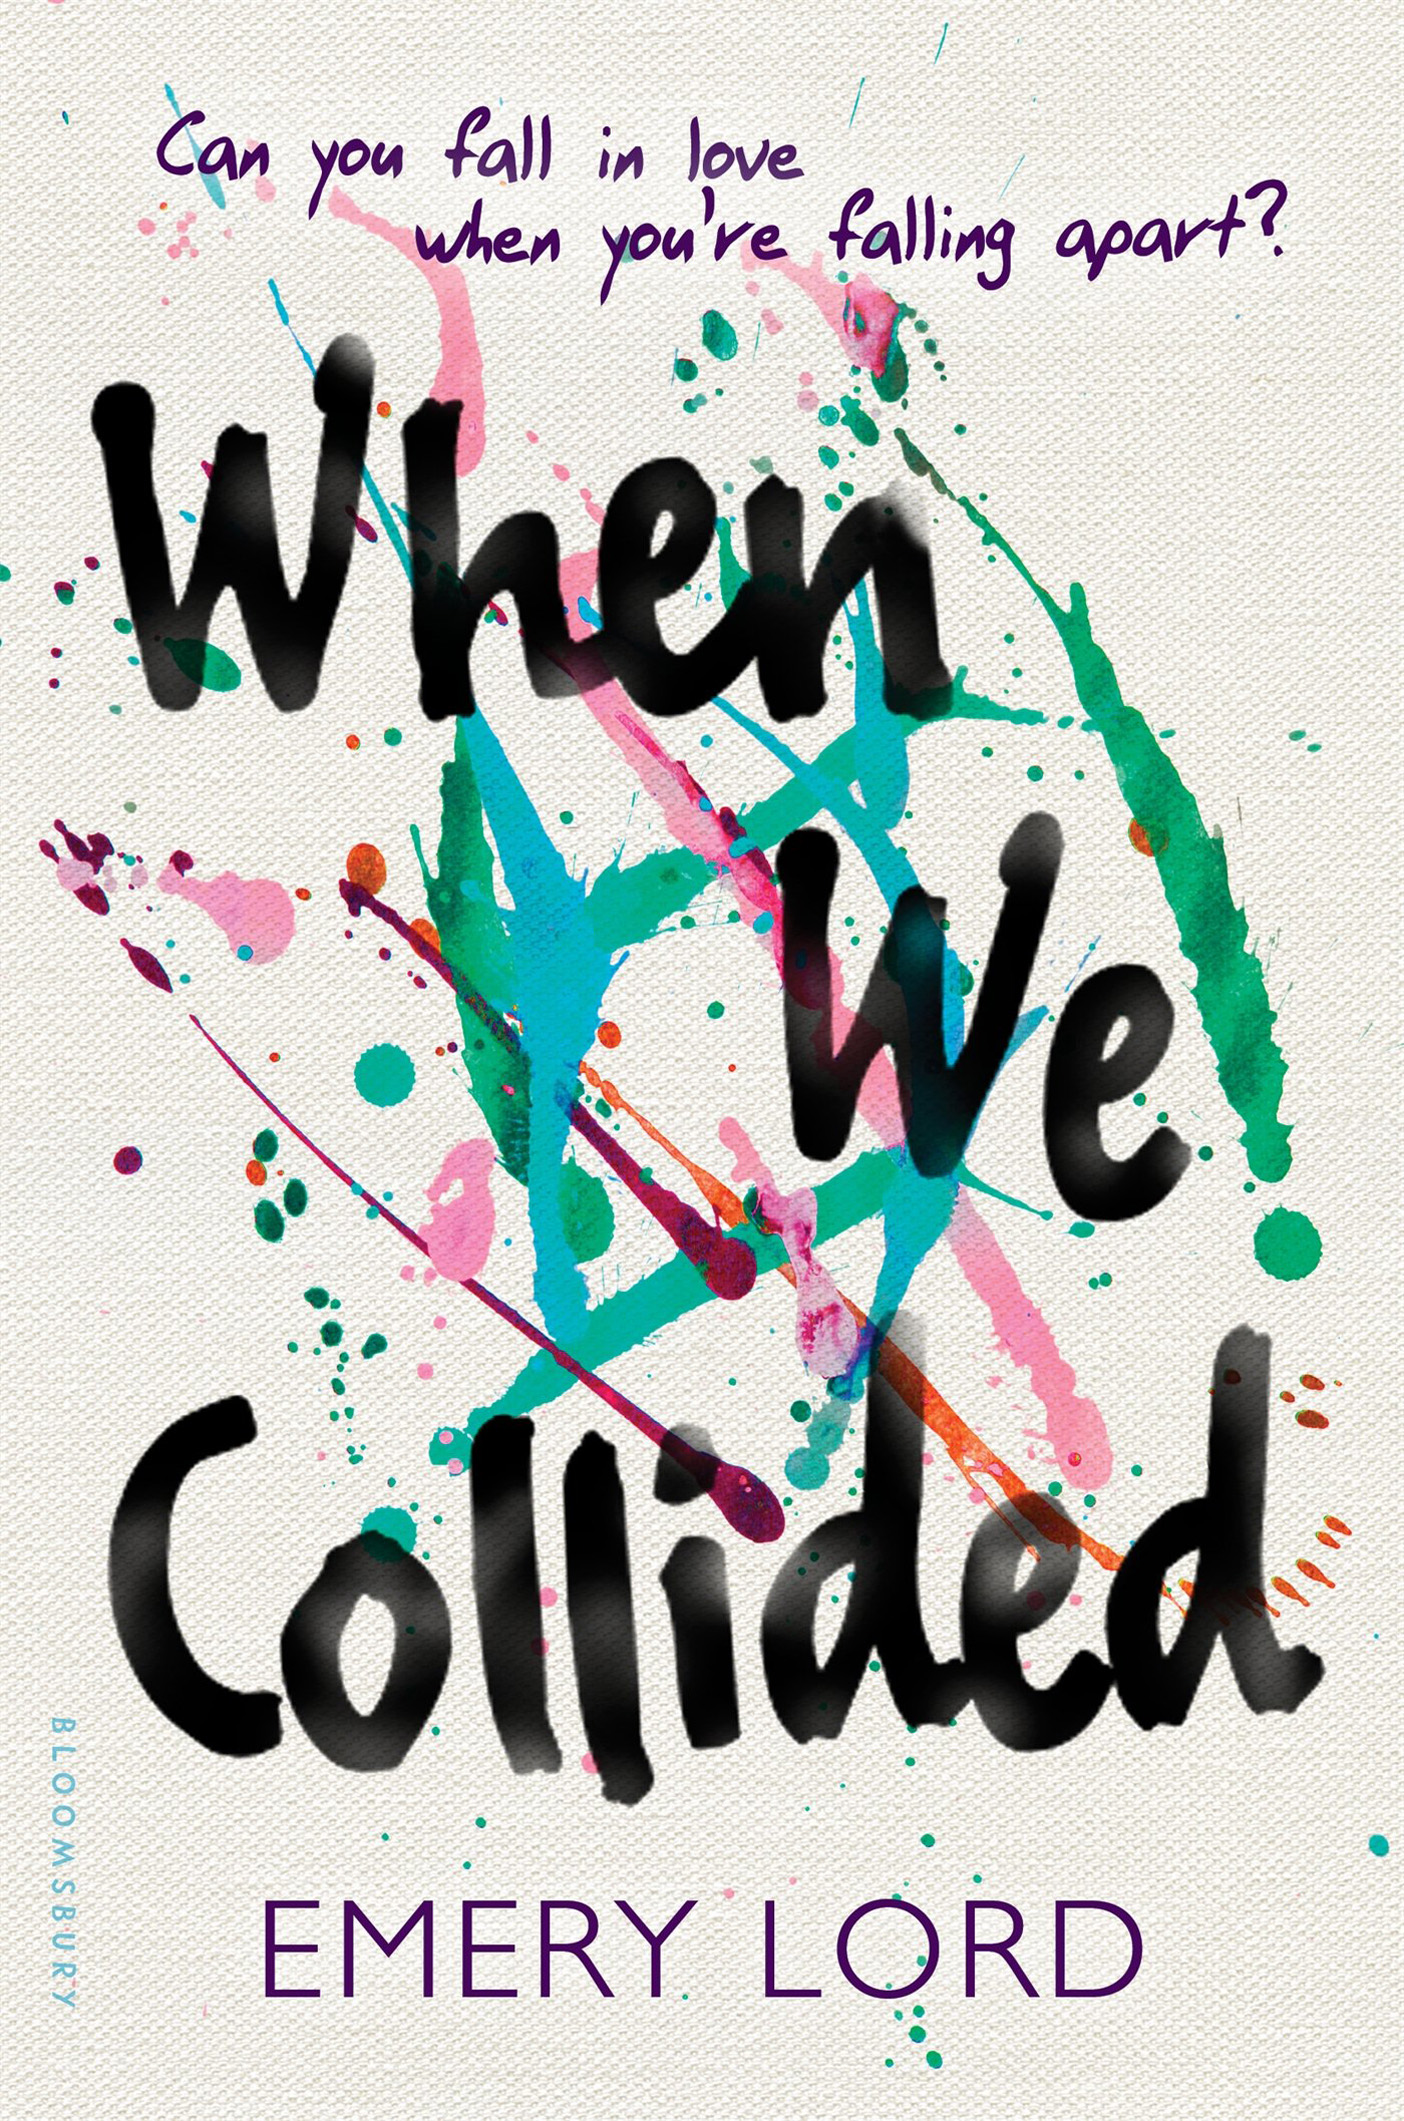 Review: When We Collided by Emery Lord